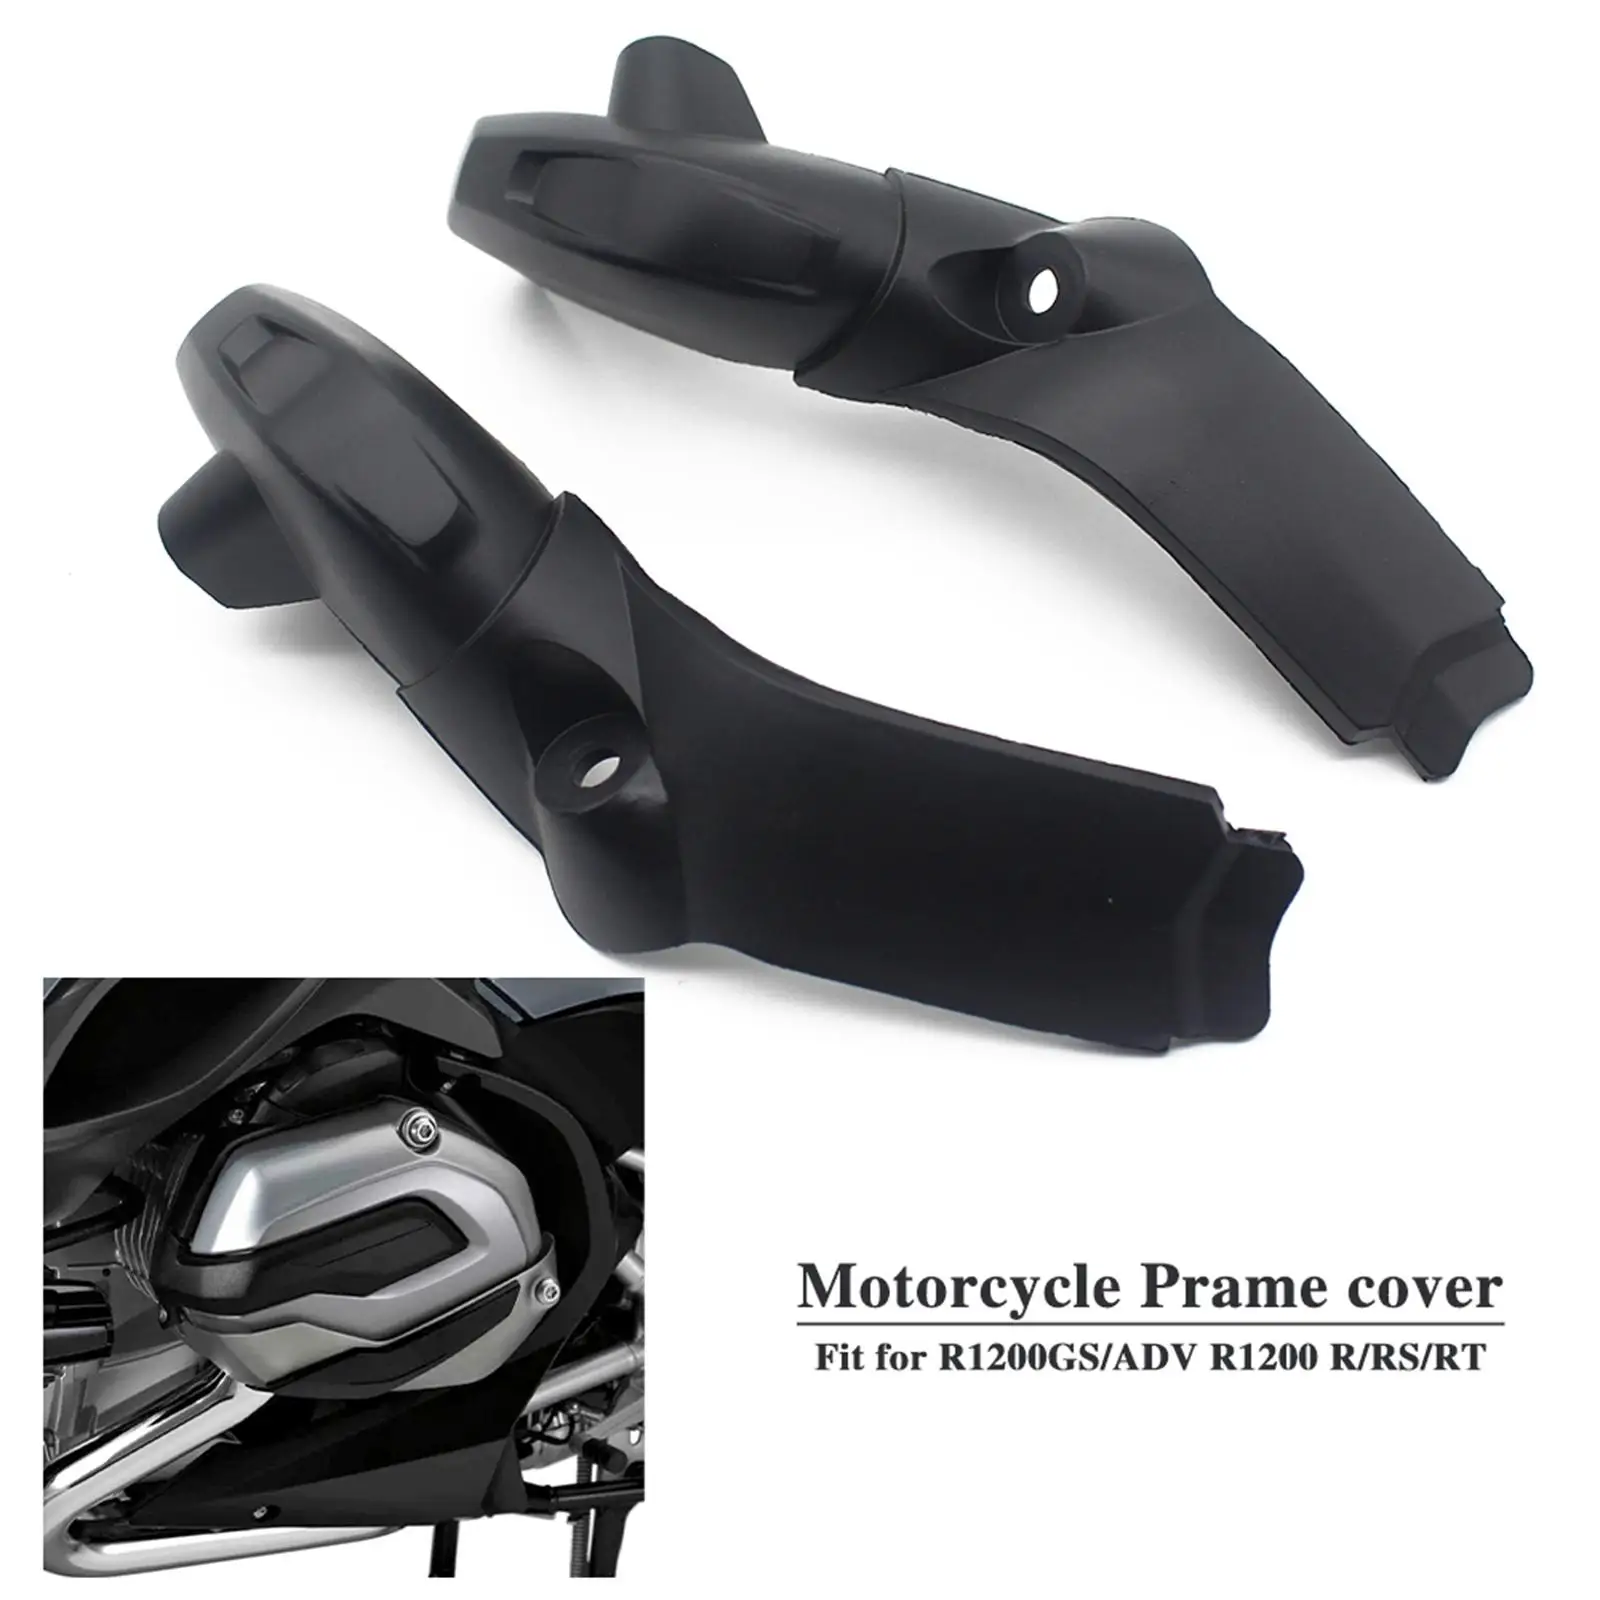 2Pcs Motorcycle Ignition Coil Spark Plug Cover Guard Fit for R1200GS GS Adv